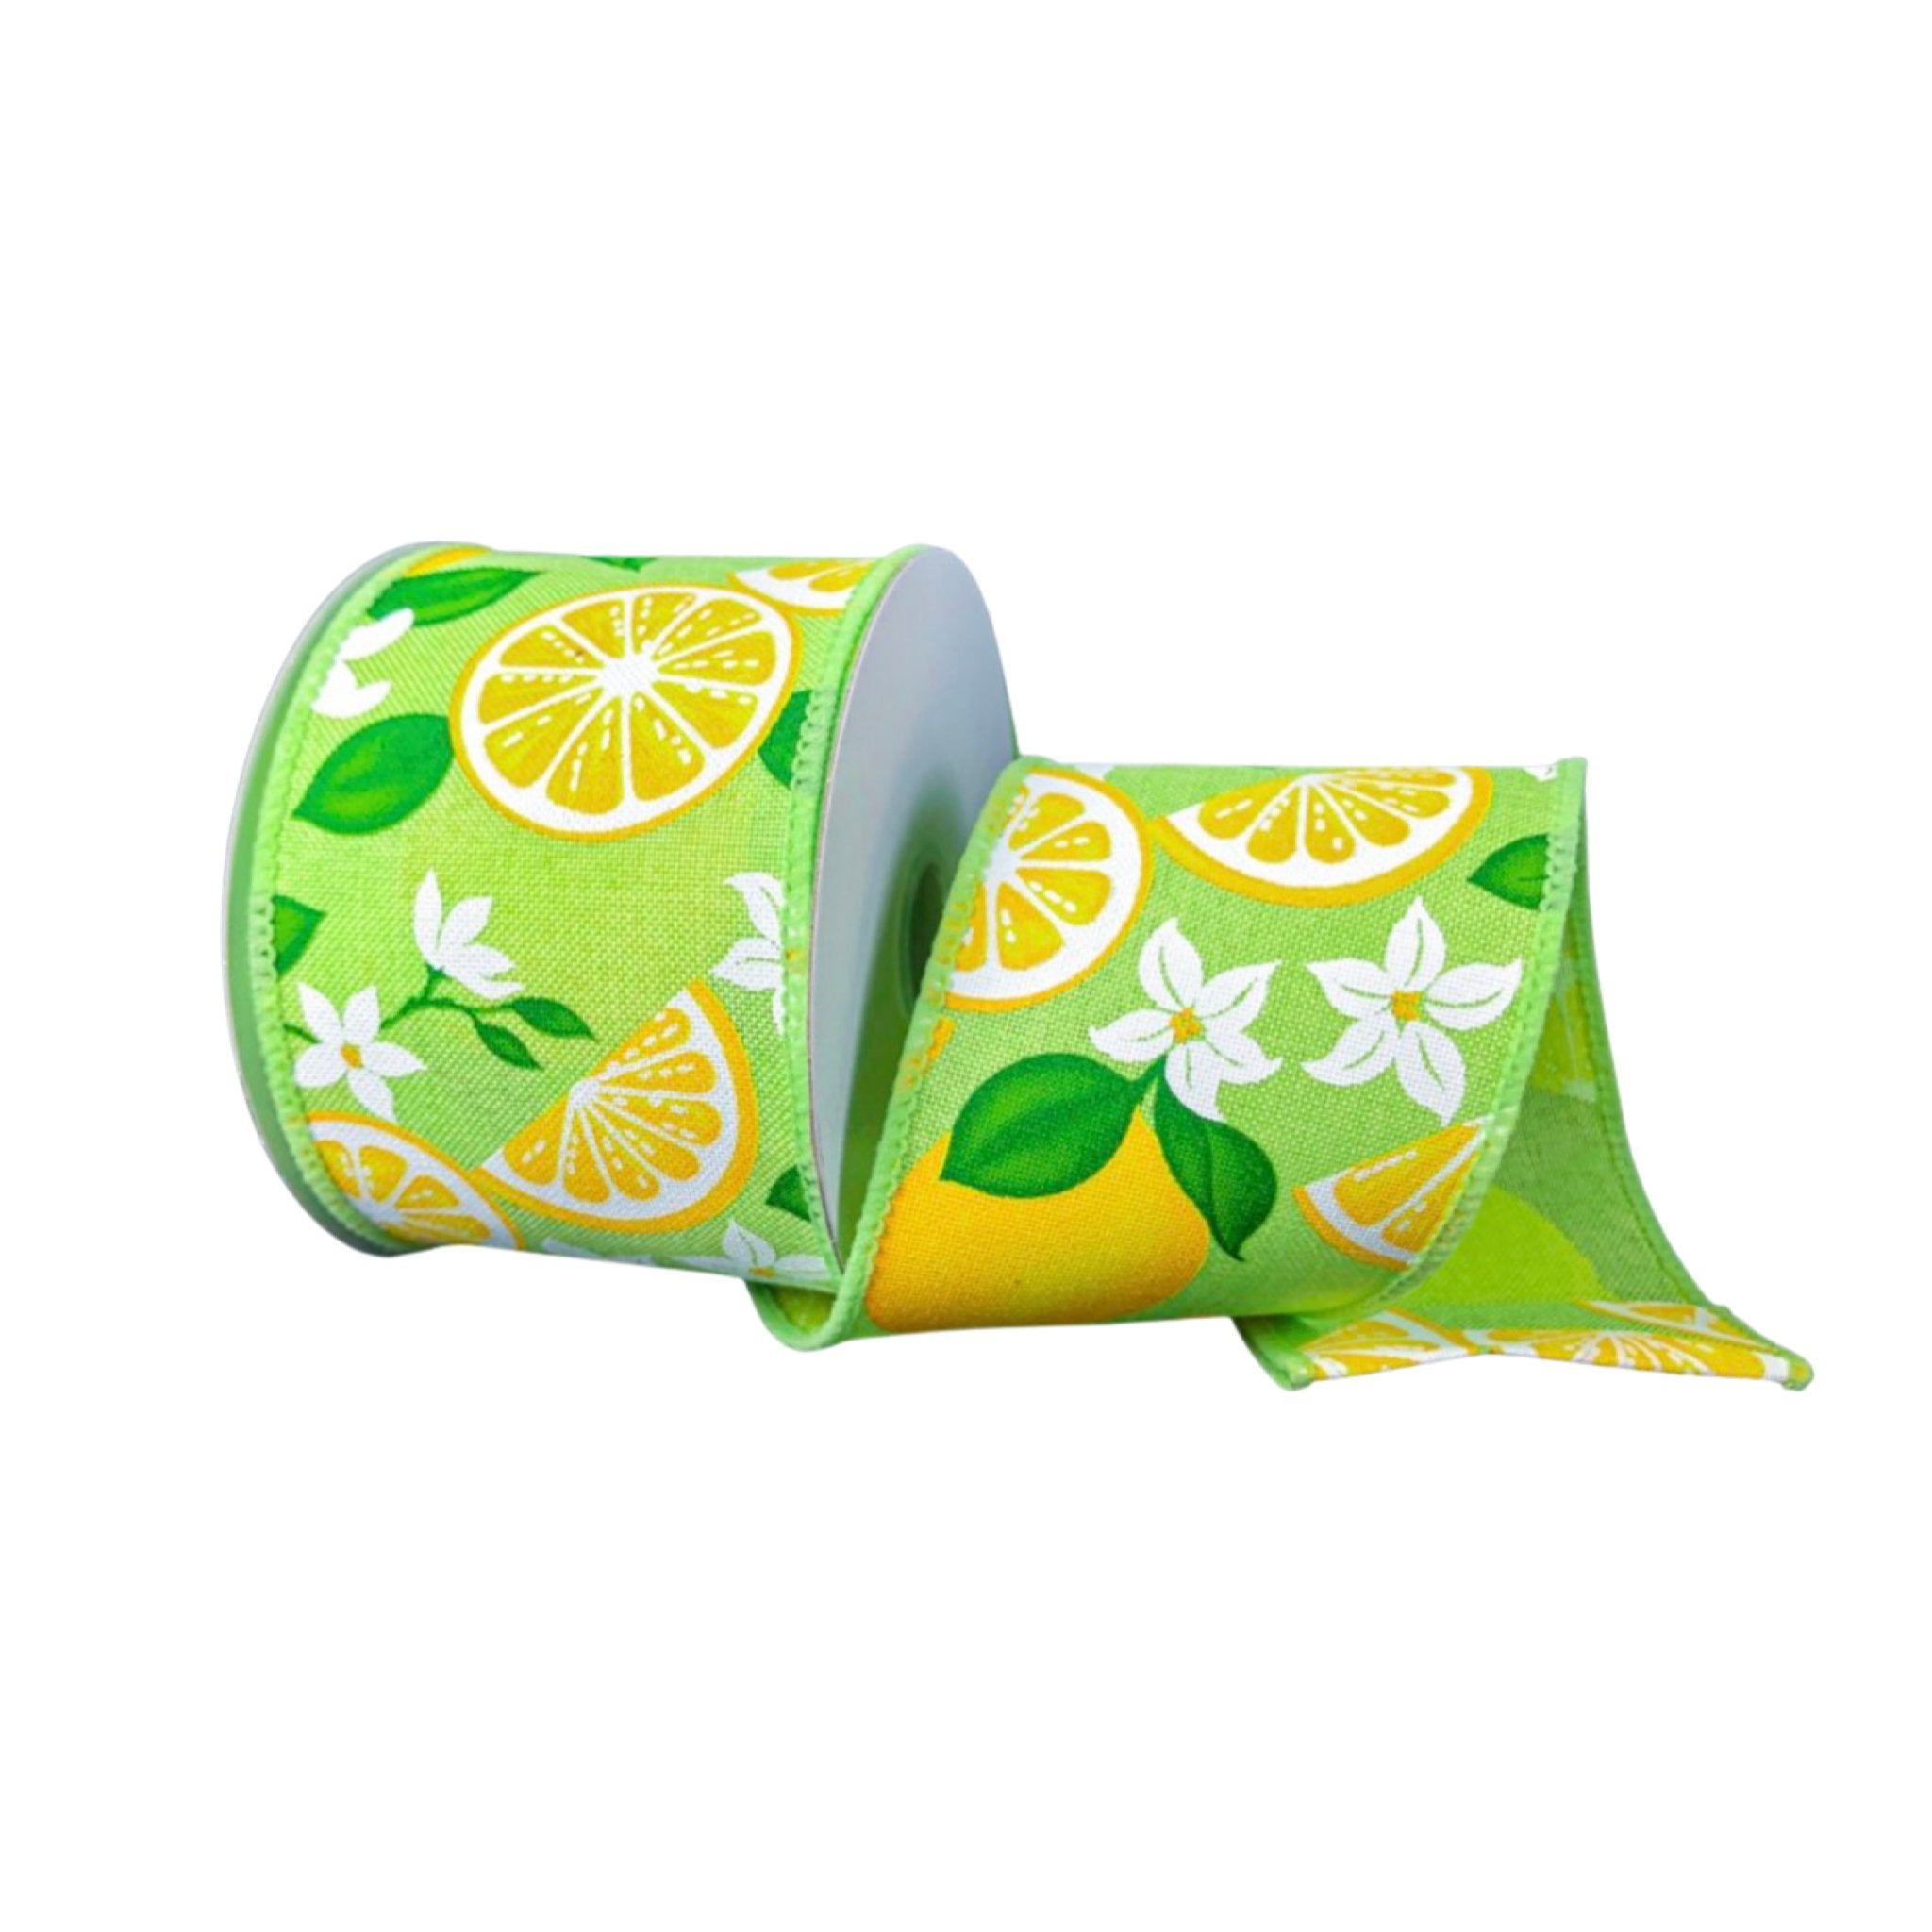 Green with lemons, 10 yards, 2.5